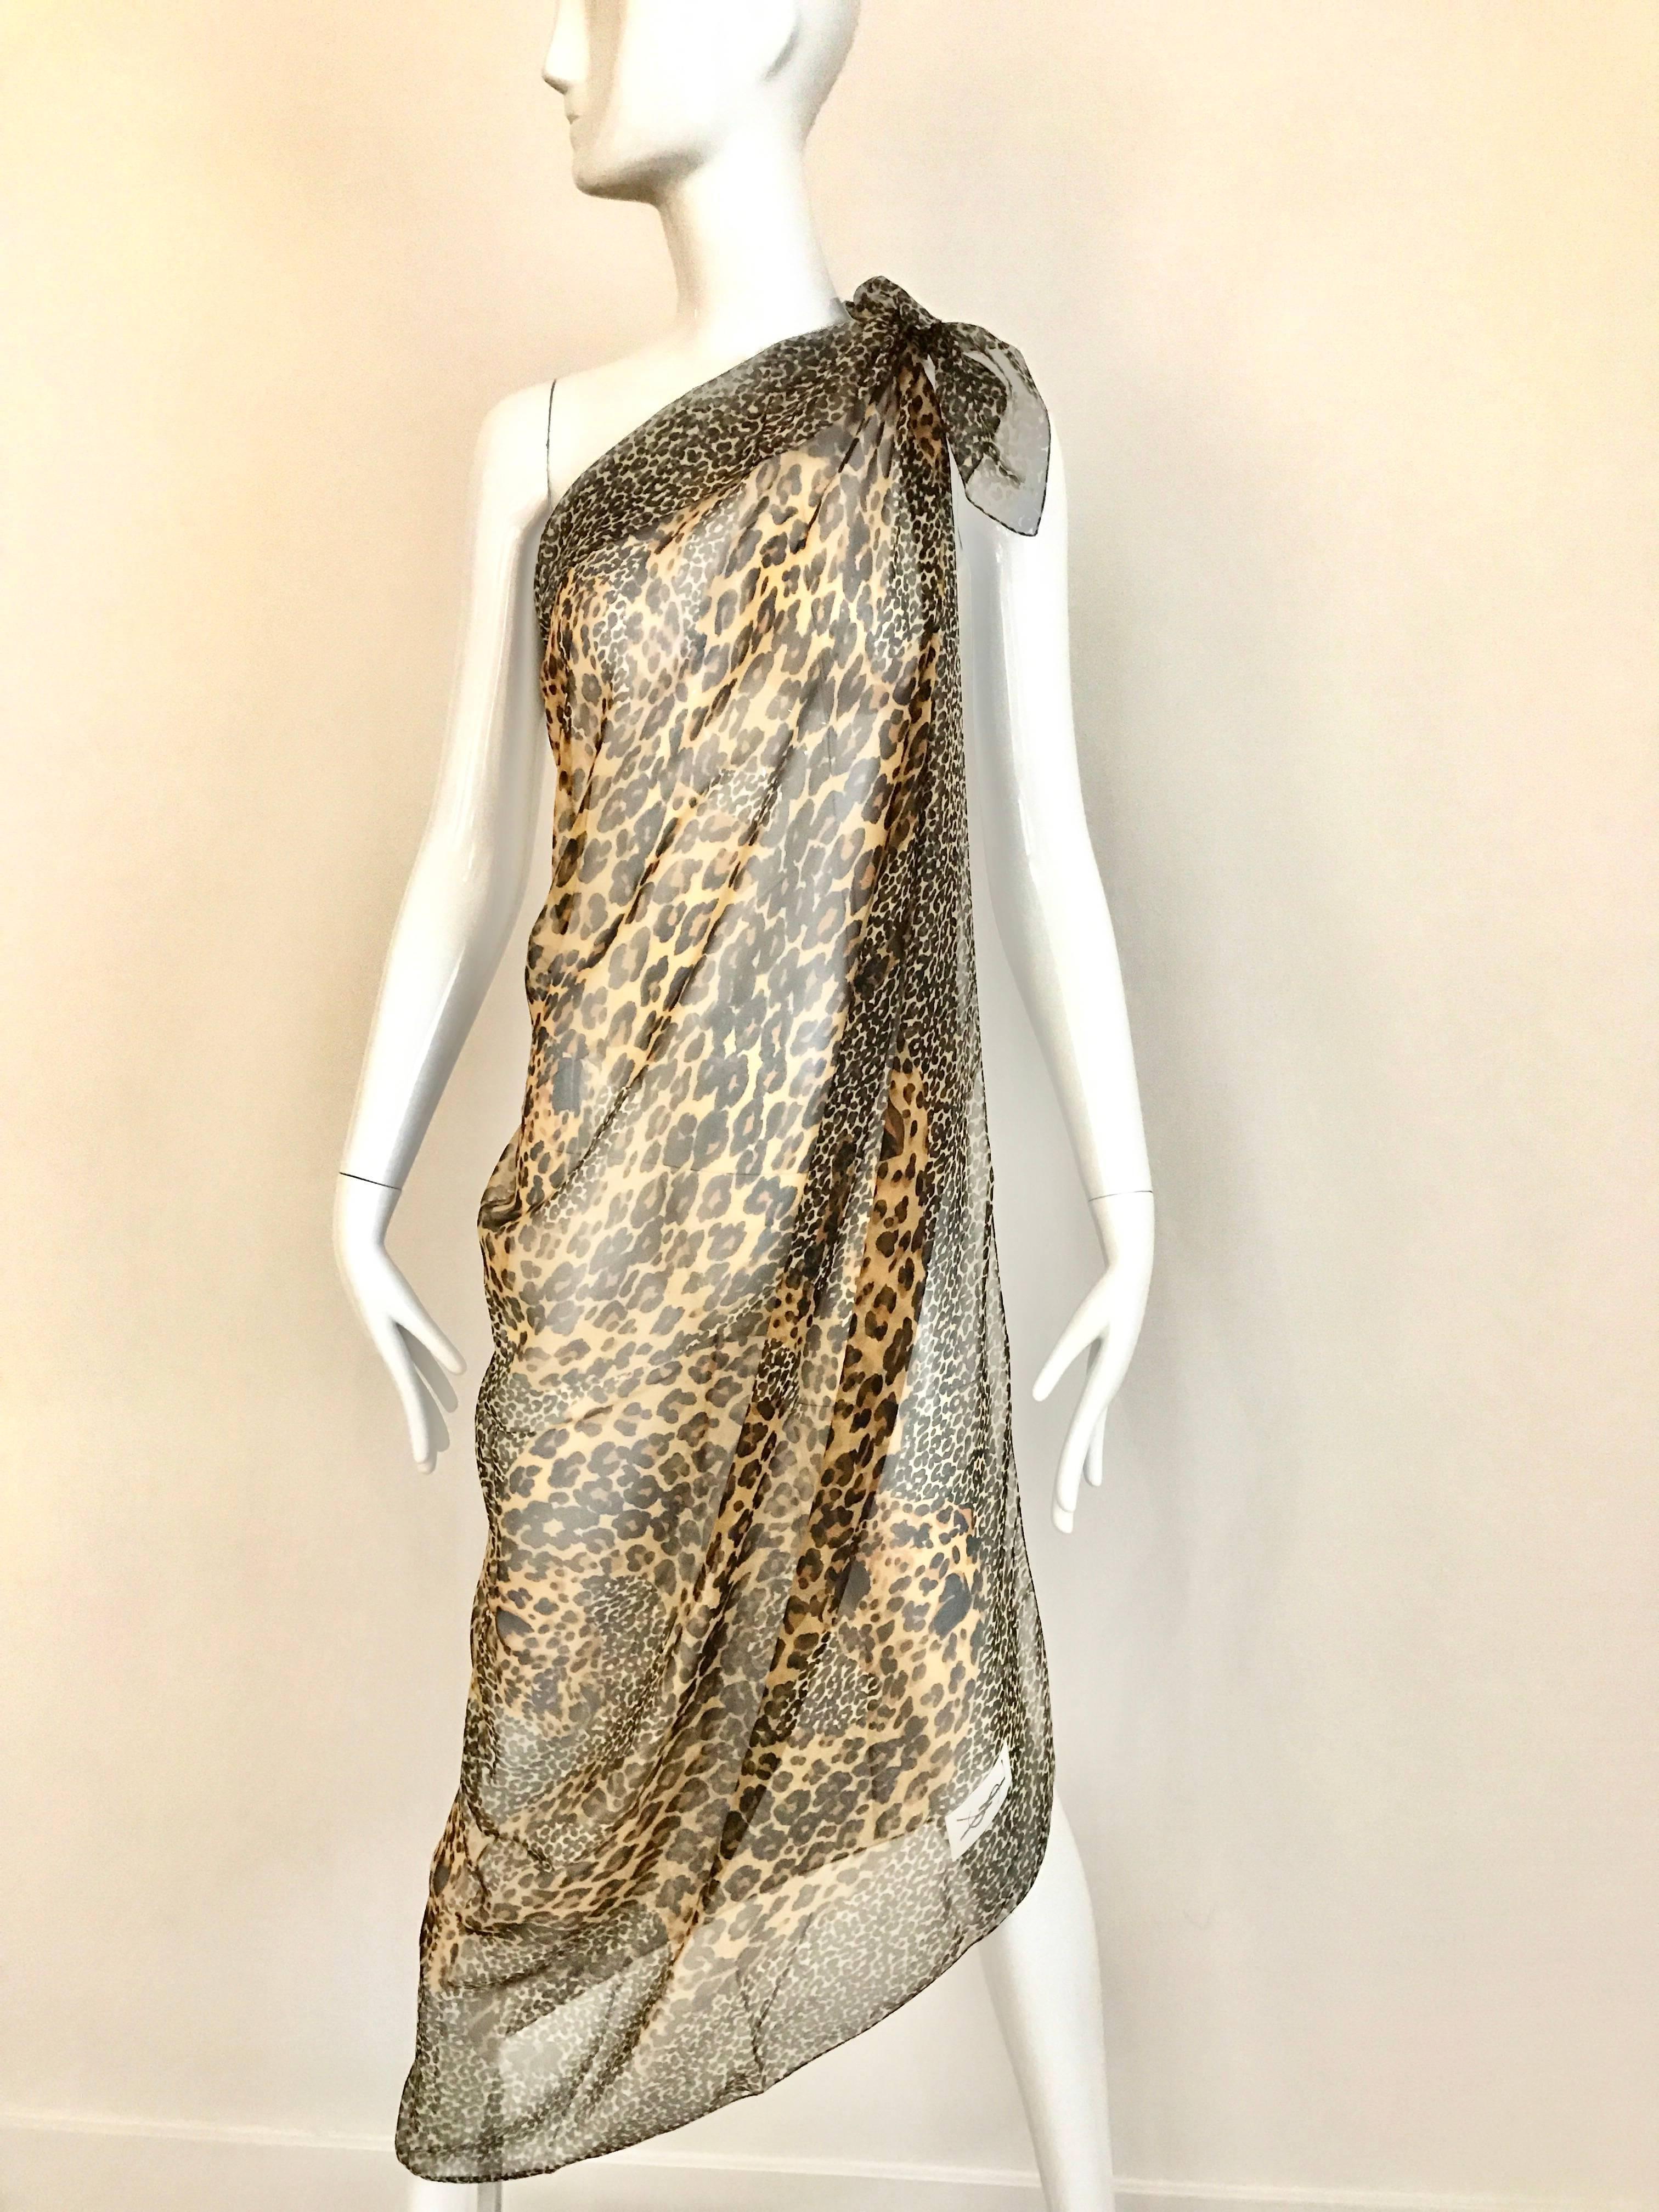 Vintage Late 1980s early 1990s Yves Saint Laurent brown and black silk leopard print oversized large scarf / shawl/ Halter top or beach cover up.
Scarf in excellent condition
54 inch x 54 inch